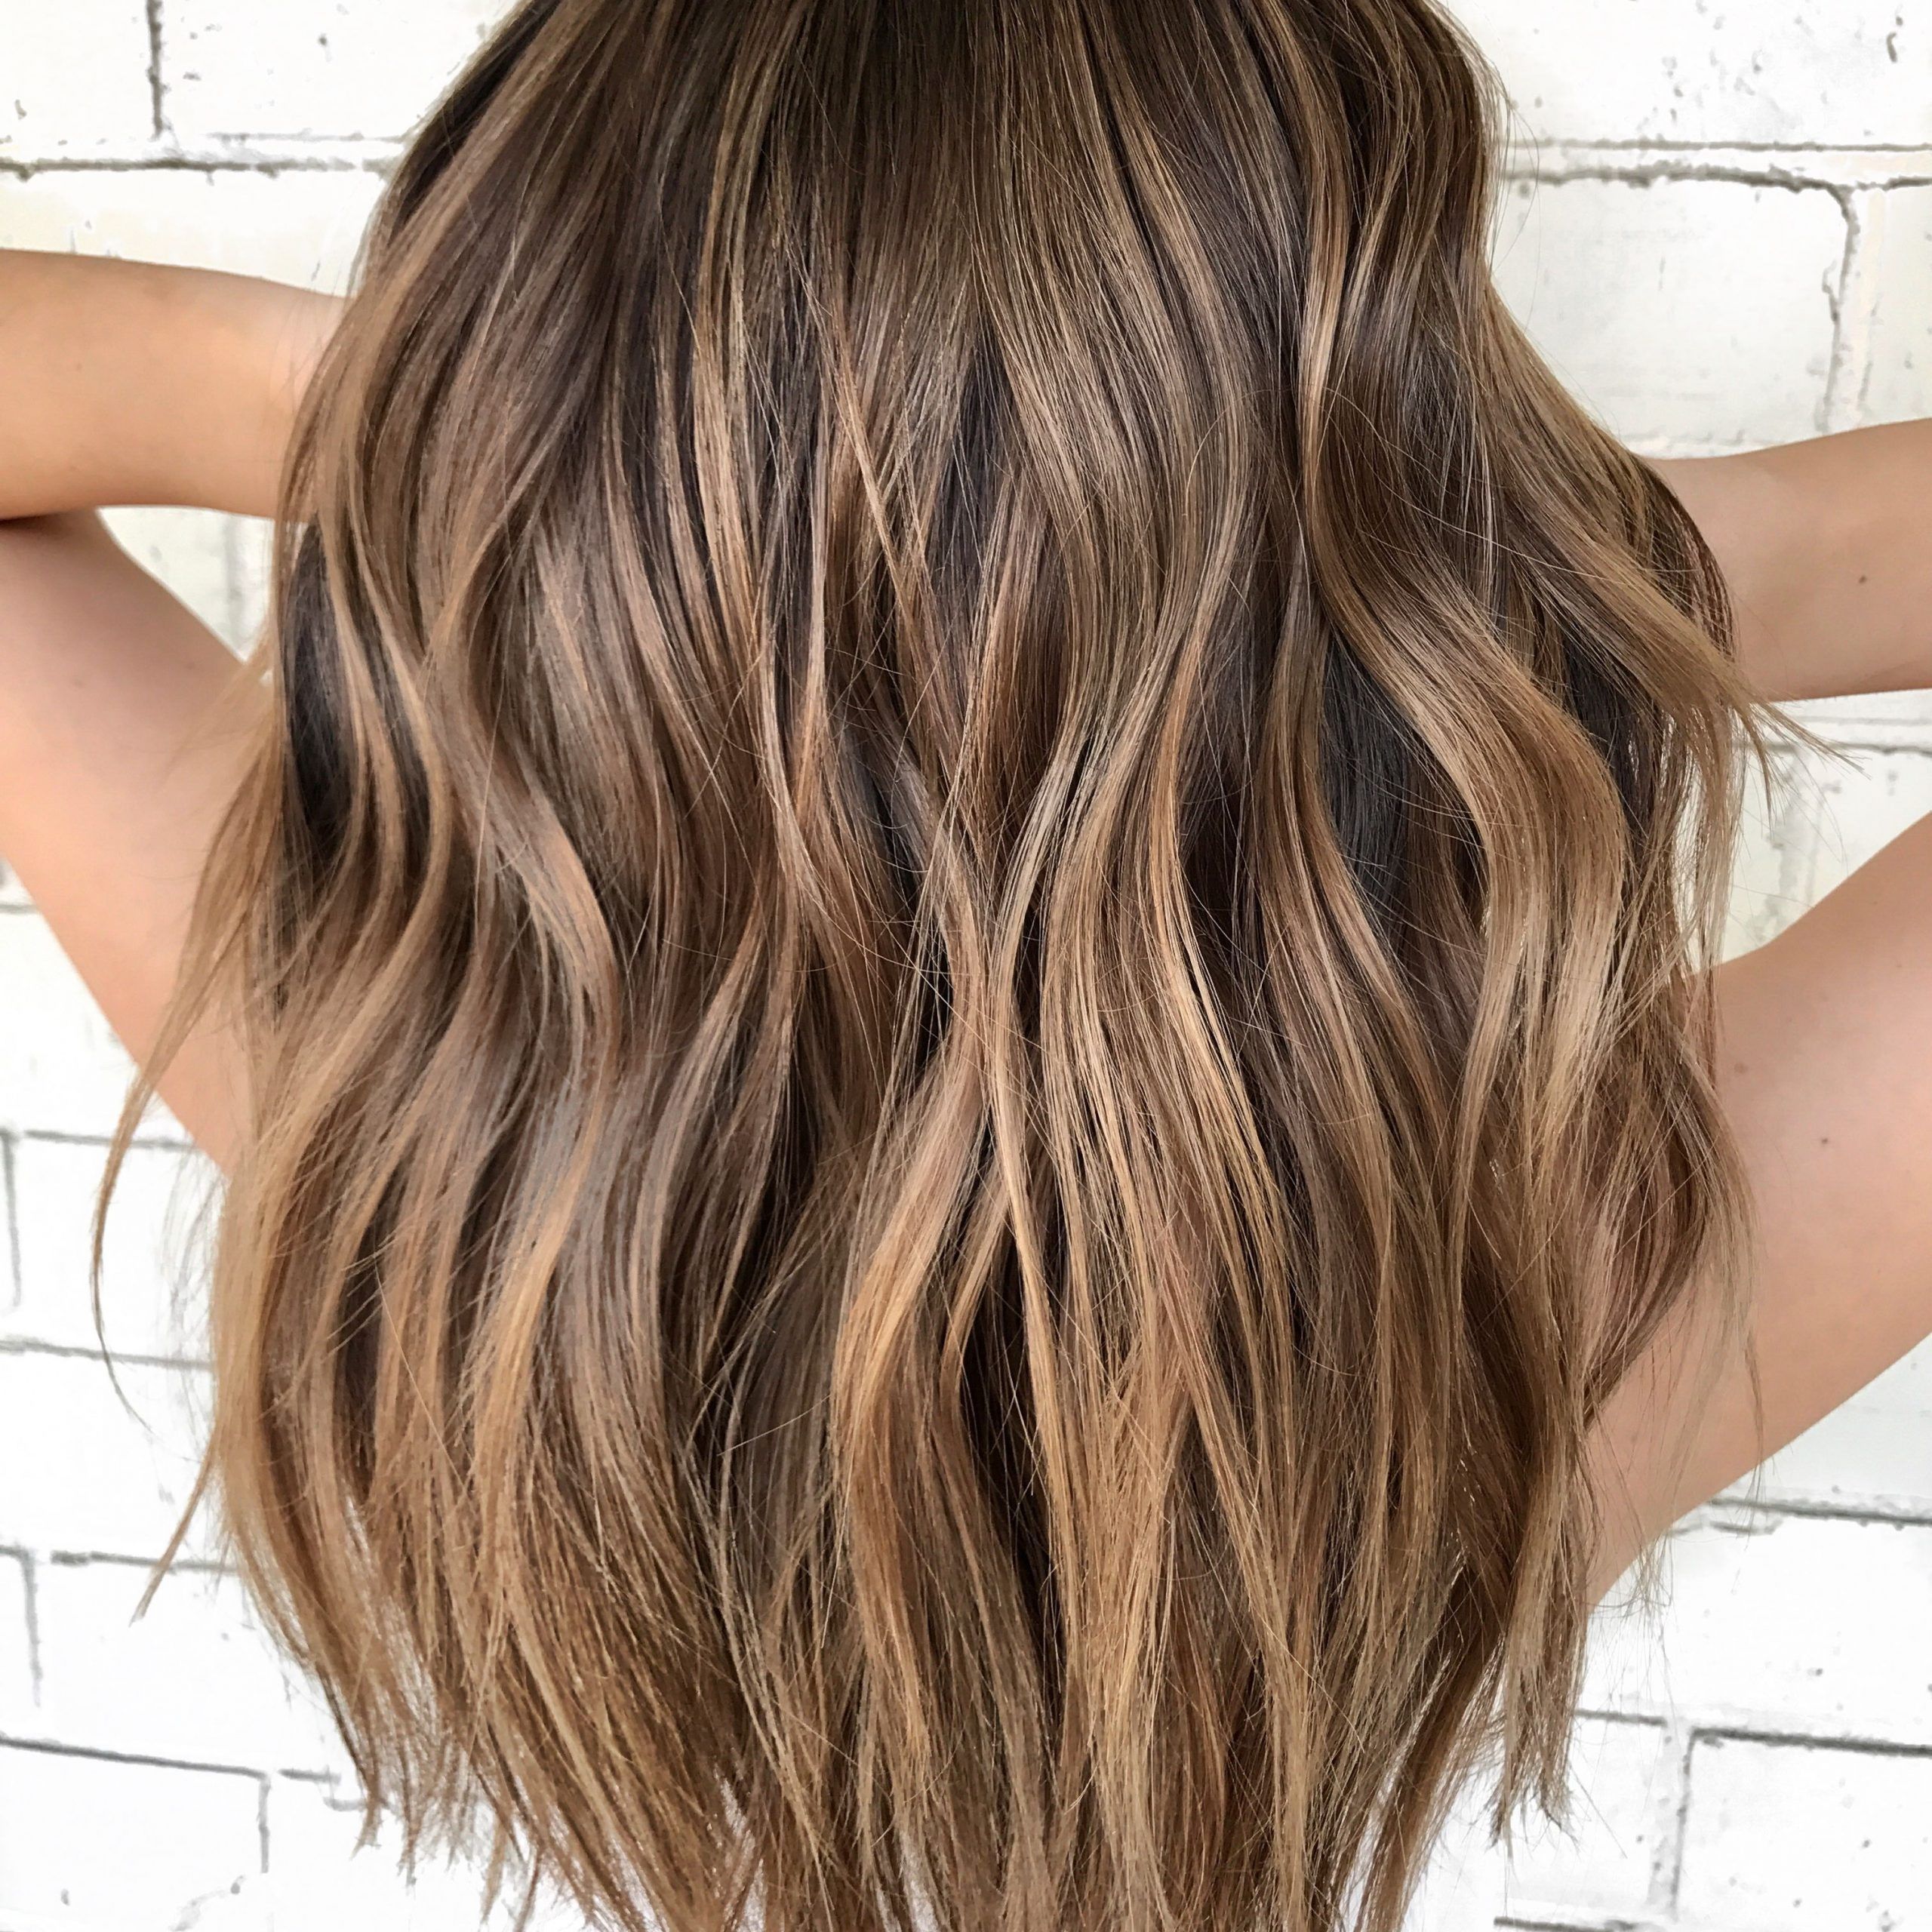 Warm Balayage Hair @nickilynnehair | Hair Color Light Brown, Balayage Hair,  Light Hair Color Regarding Most Current Layered Haircuts With Warm Balayage (View 12 of 25)